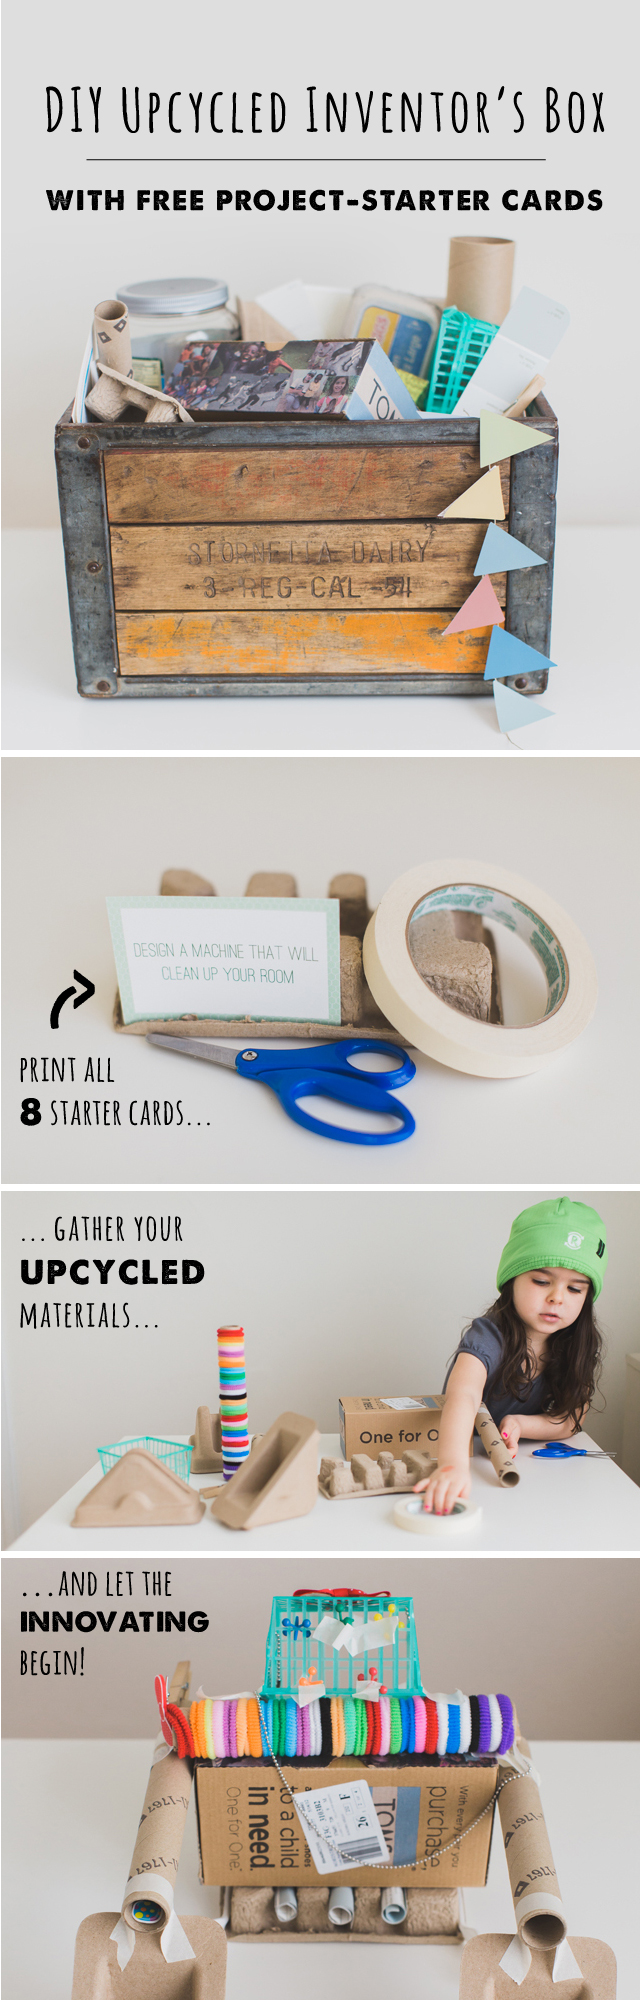 Upcycled Inventor's box - awesome activity for teaching kids about recycling and creativity. Be sure to get the free printable idea cards!